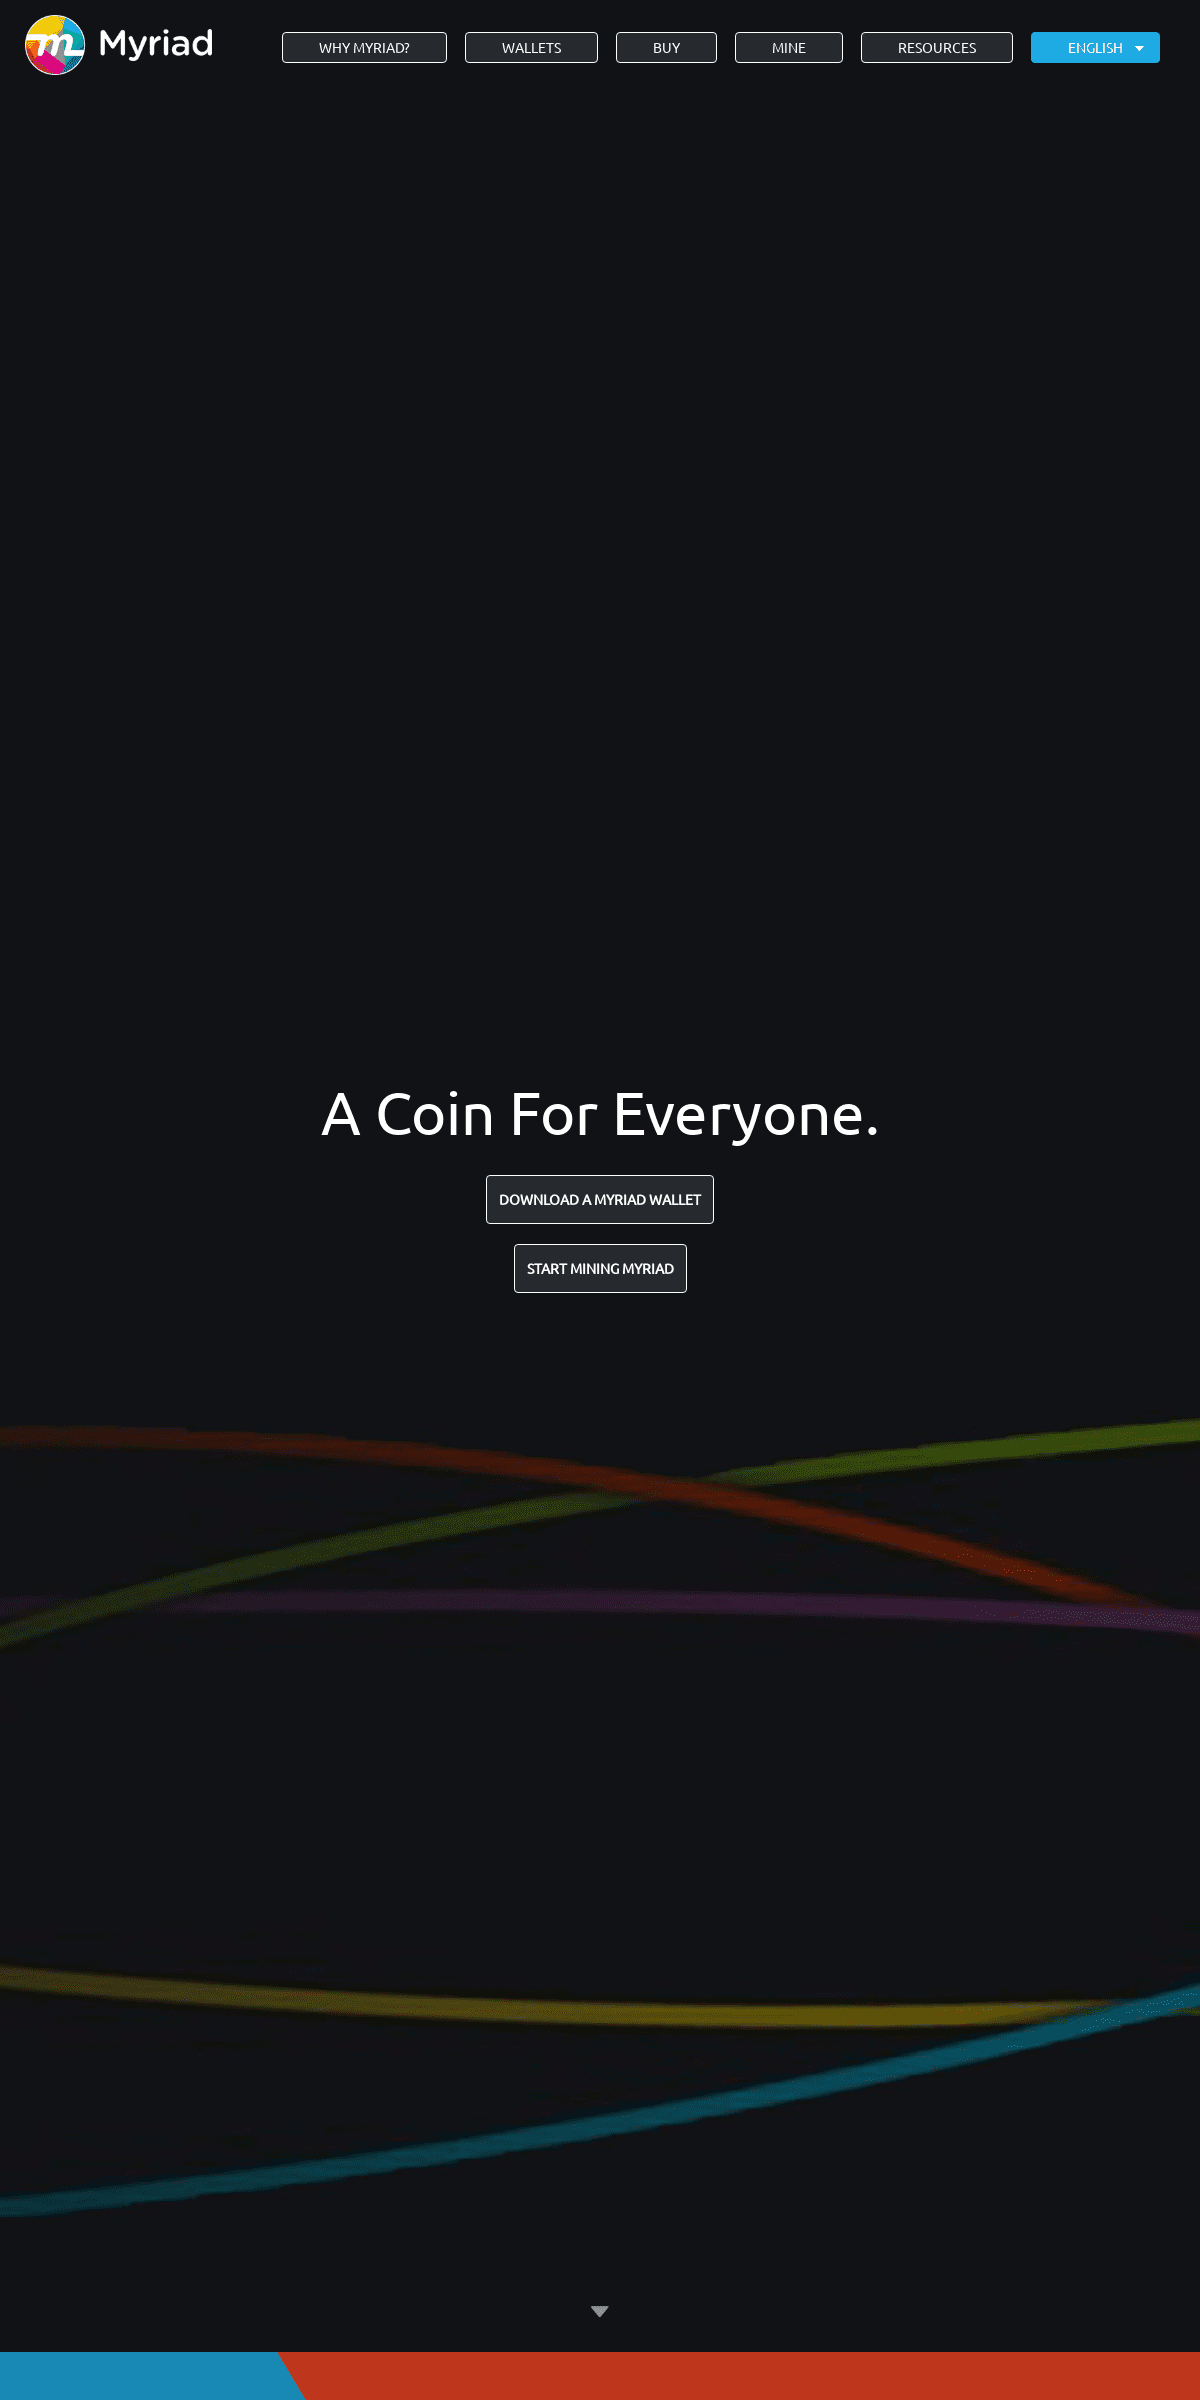 A complete backup of myriadcoin.org